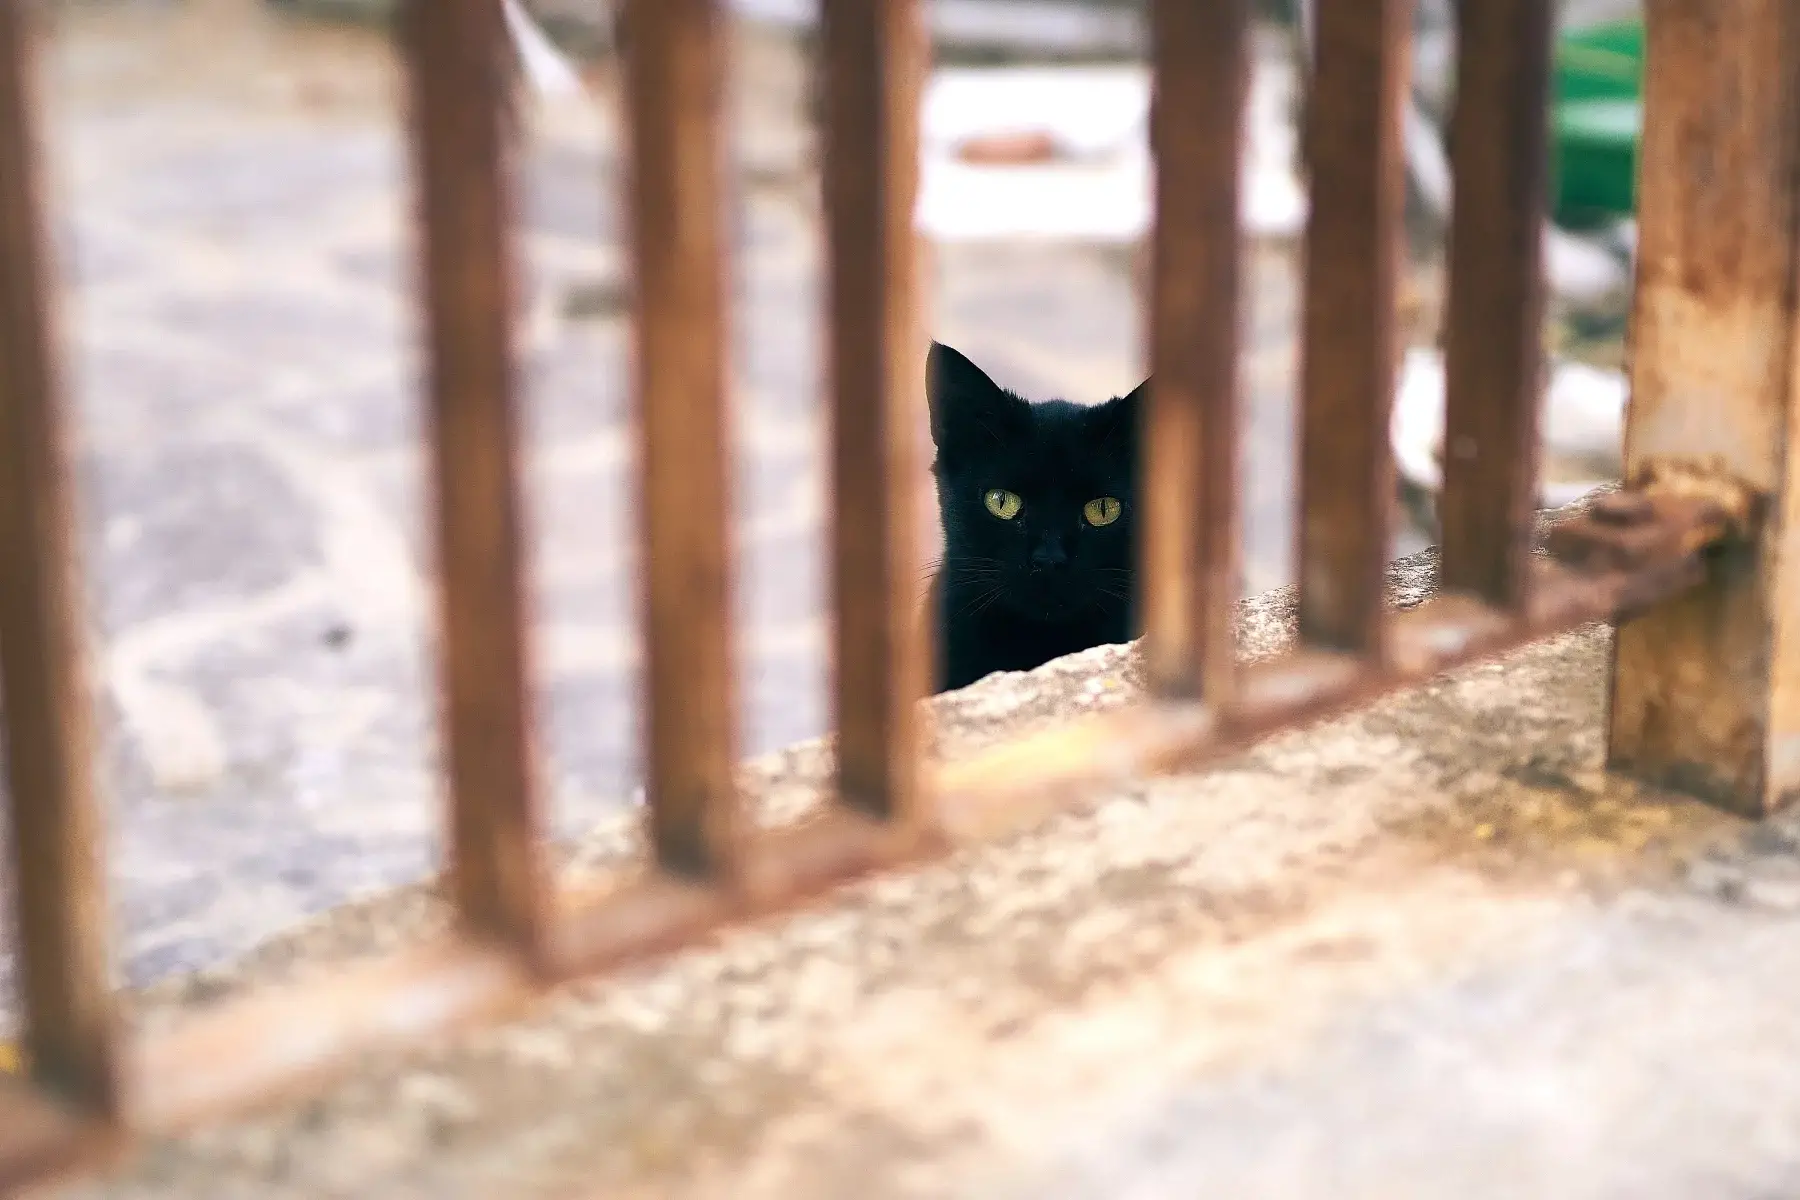 A black cat looking through railings. There is a superstition in Italy that causes bad luck if you cross a black cat's path.